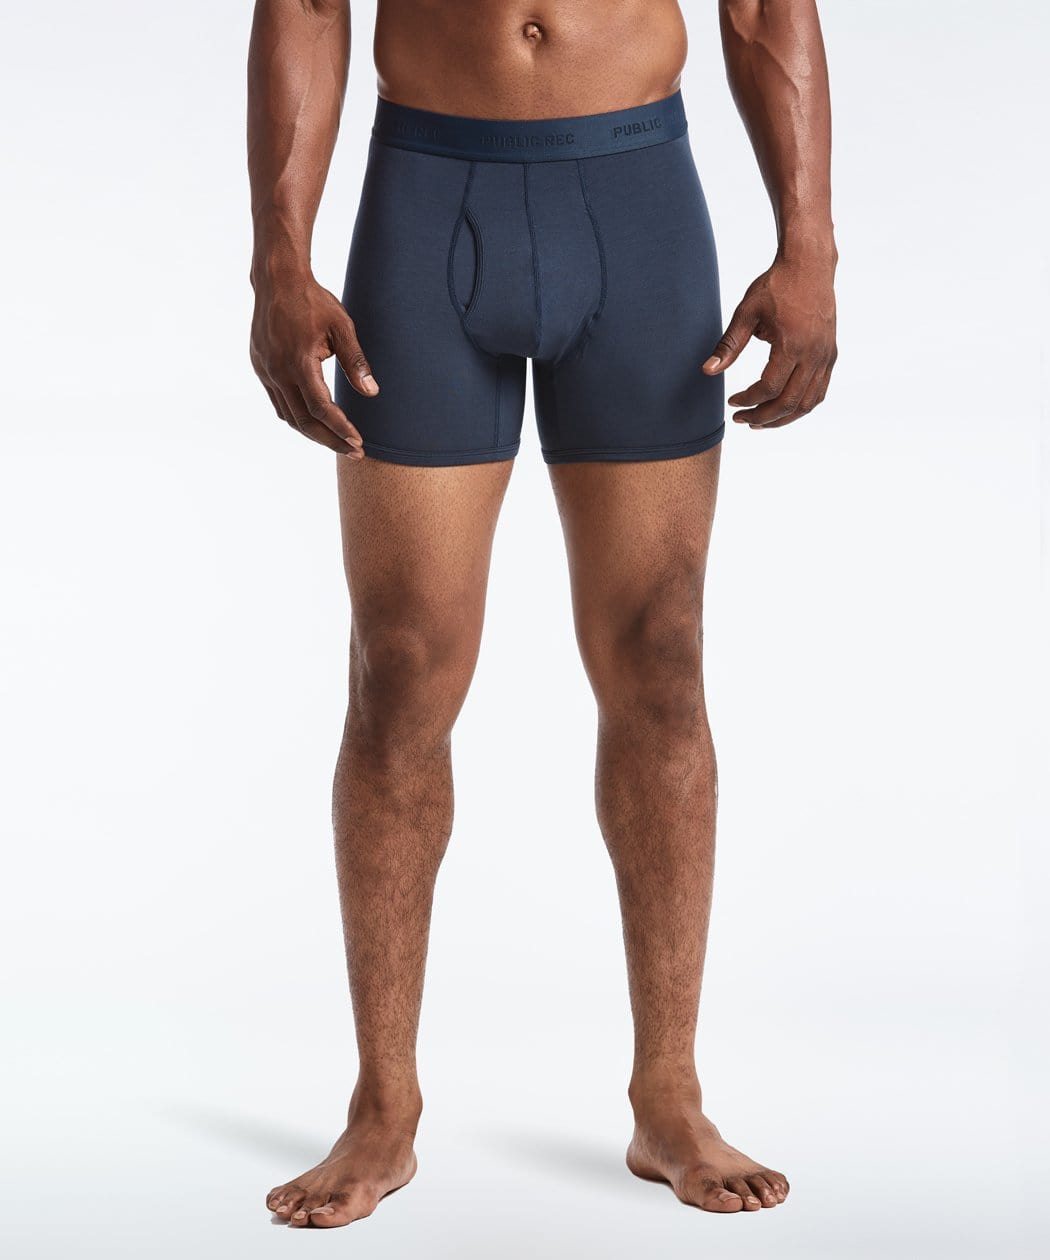 Barely There Boxer Trunk, Men's Nickel